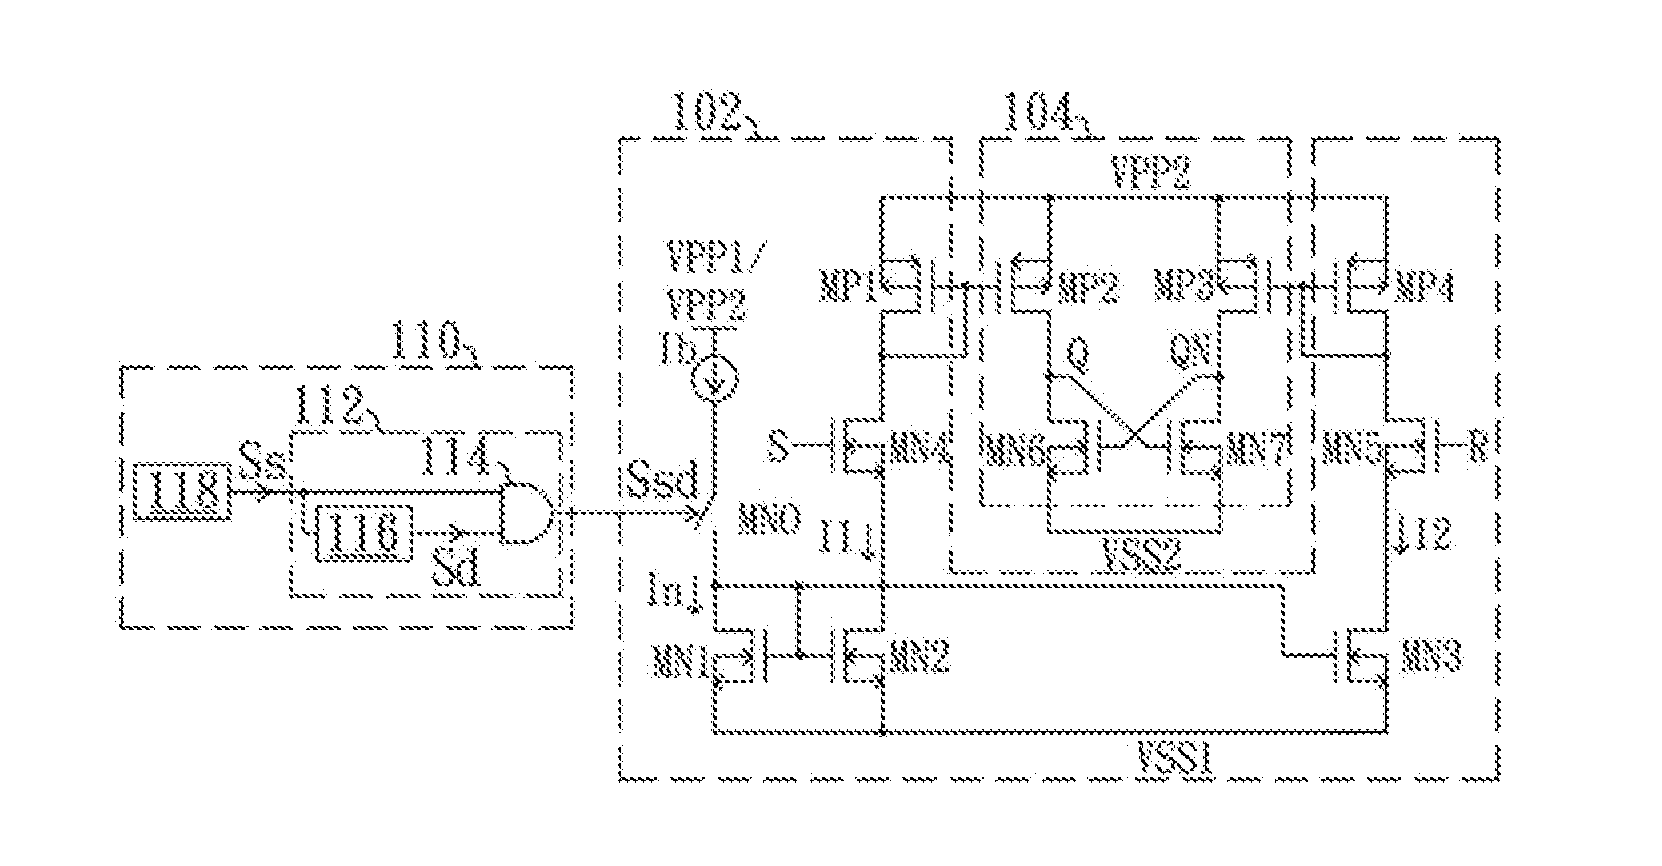 Level shift circuit and dc-dc converter for using the same